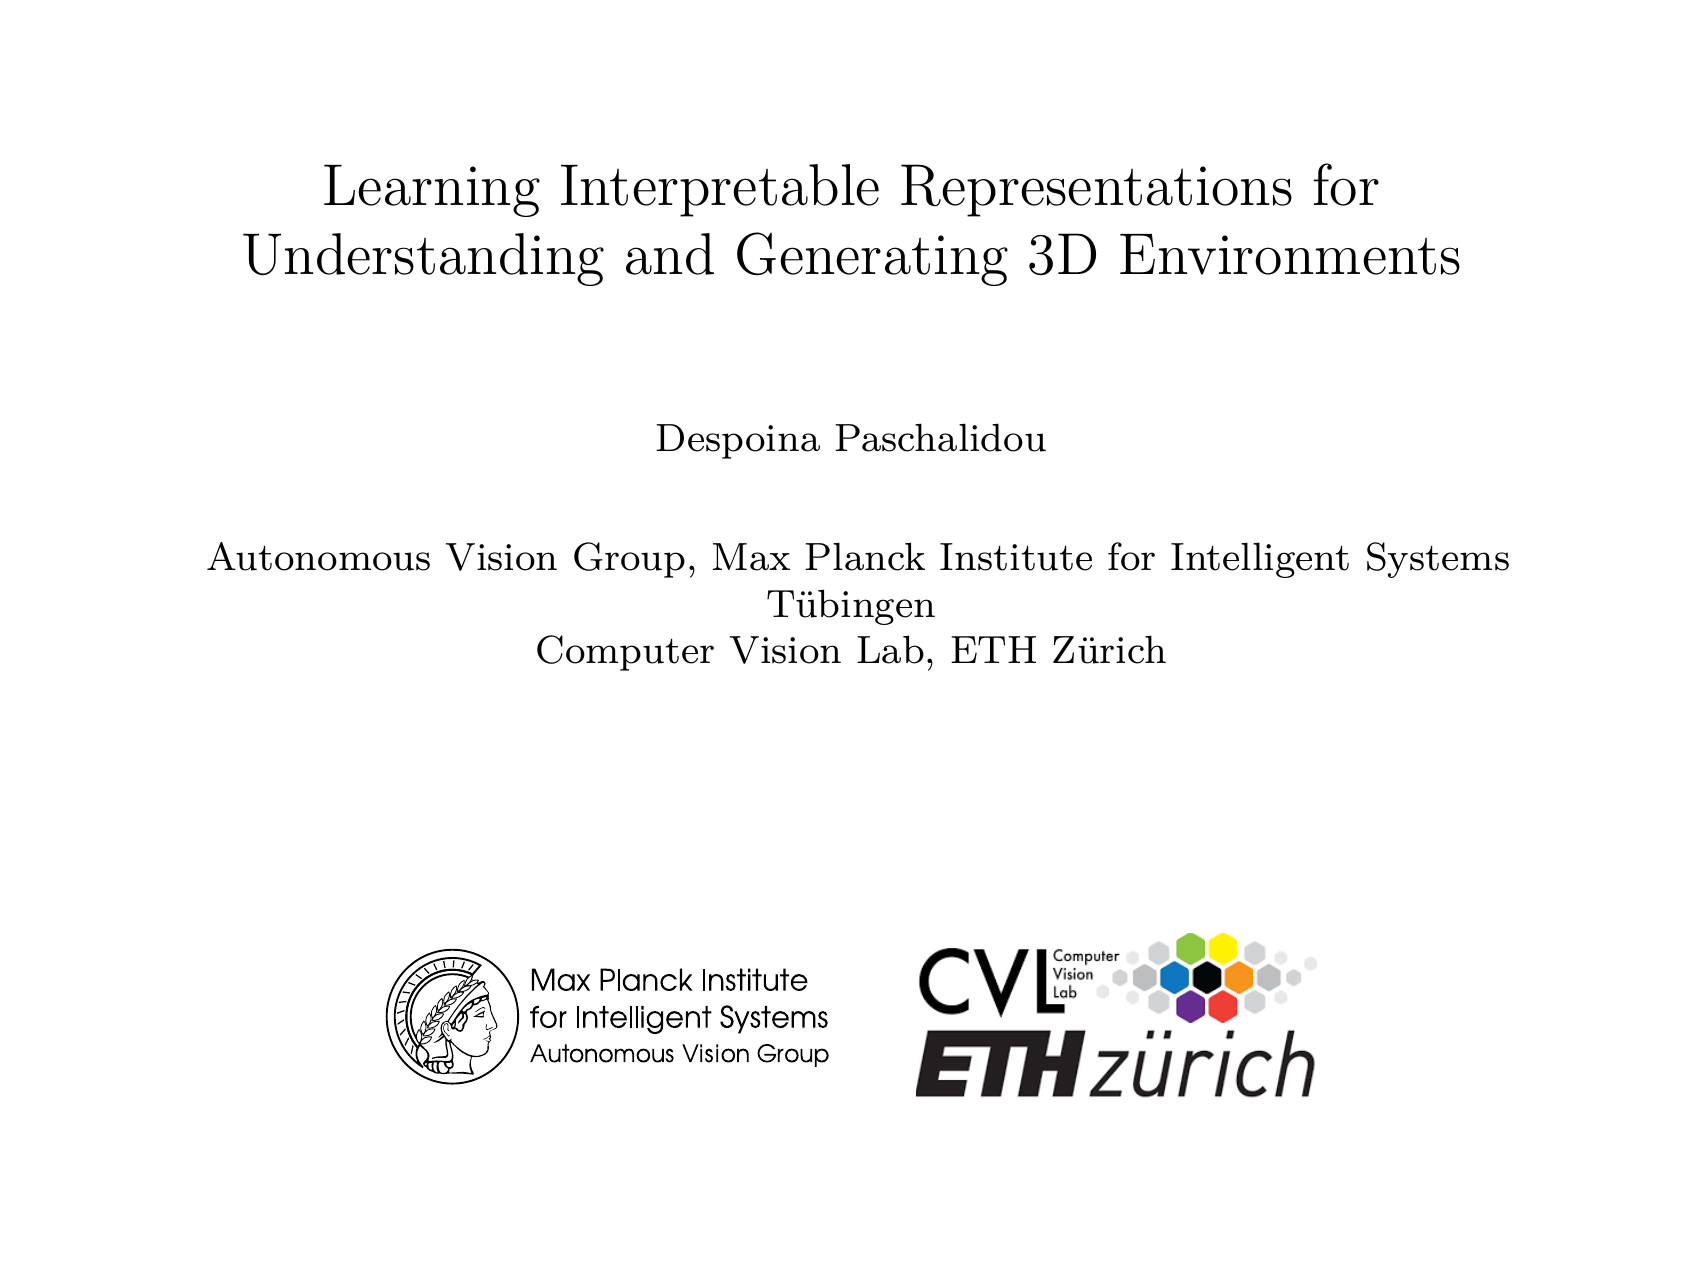 Learning Interpretable Representations for Understanding and Generating 3D Environments